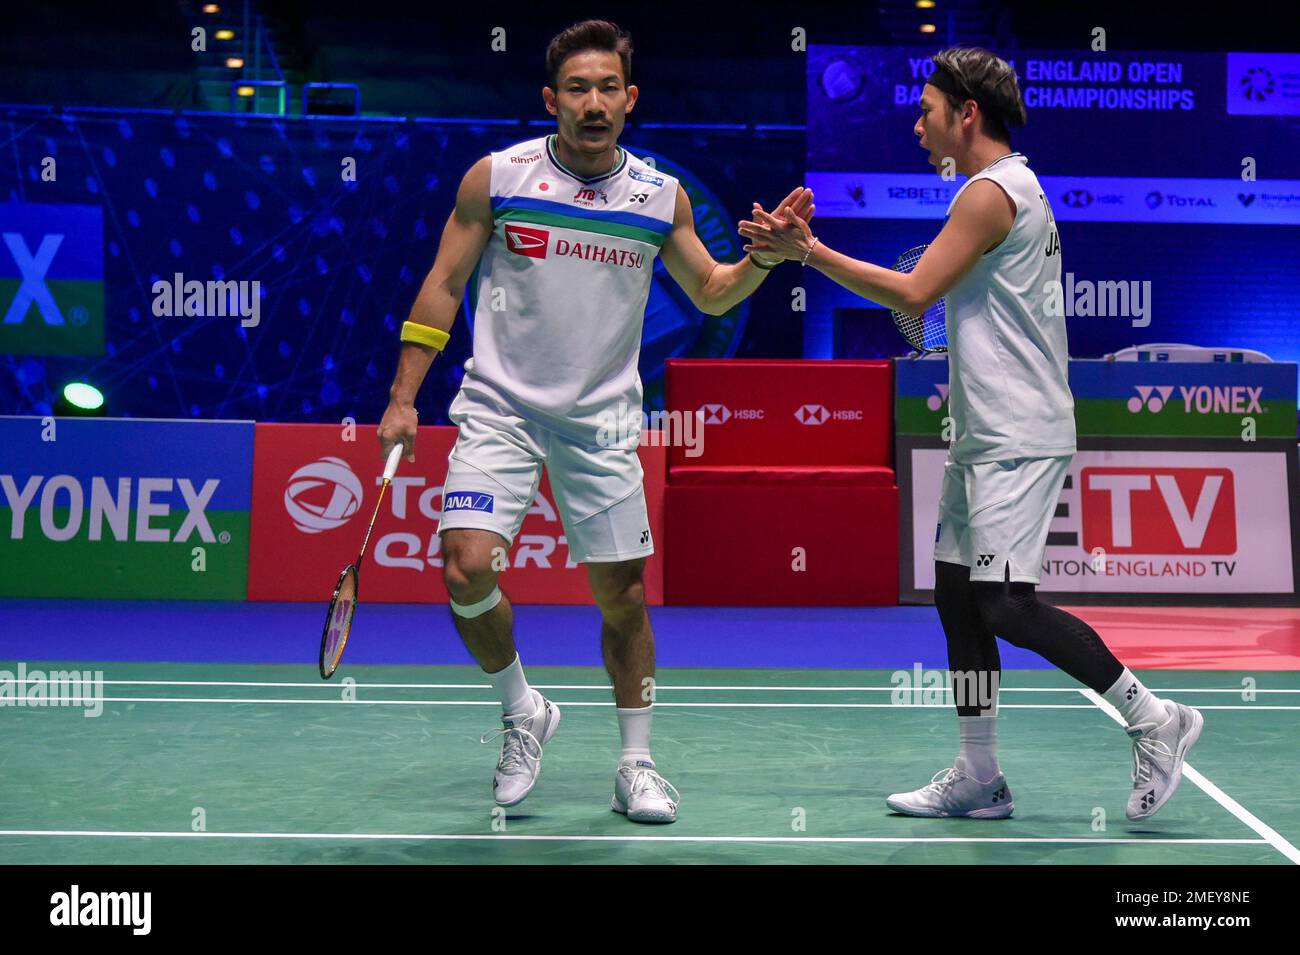 Japans Takeshi Kamura, right, and Keigo Sonoda shake hands during the mens doubles final match of the All England Open Badminton Championships against Japans Yuta Watanabe and Hiroyuki Endo at the Utilita